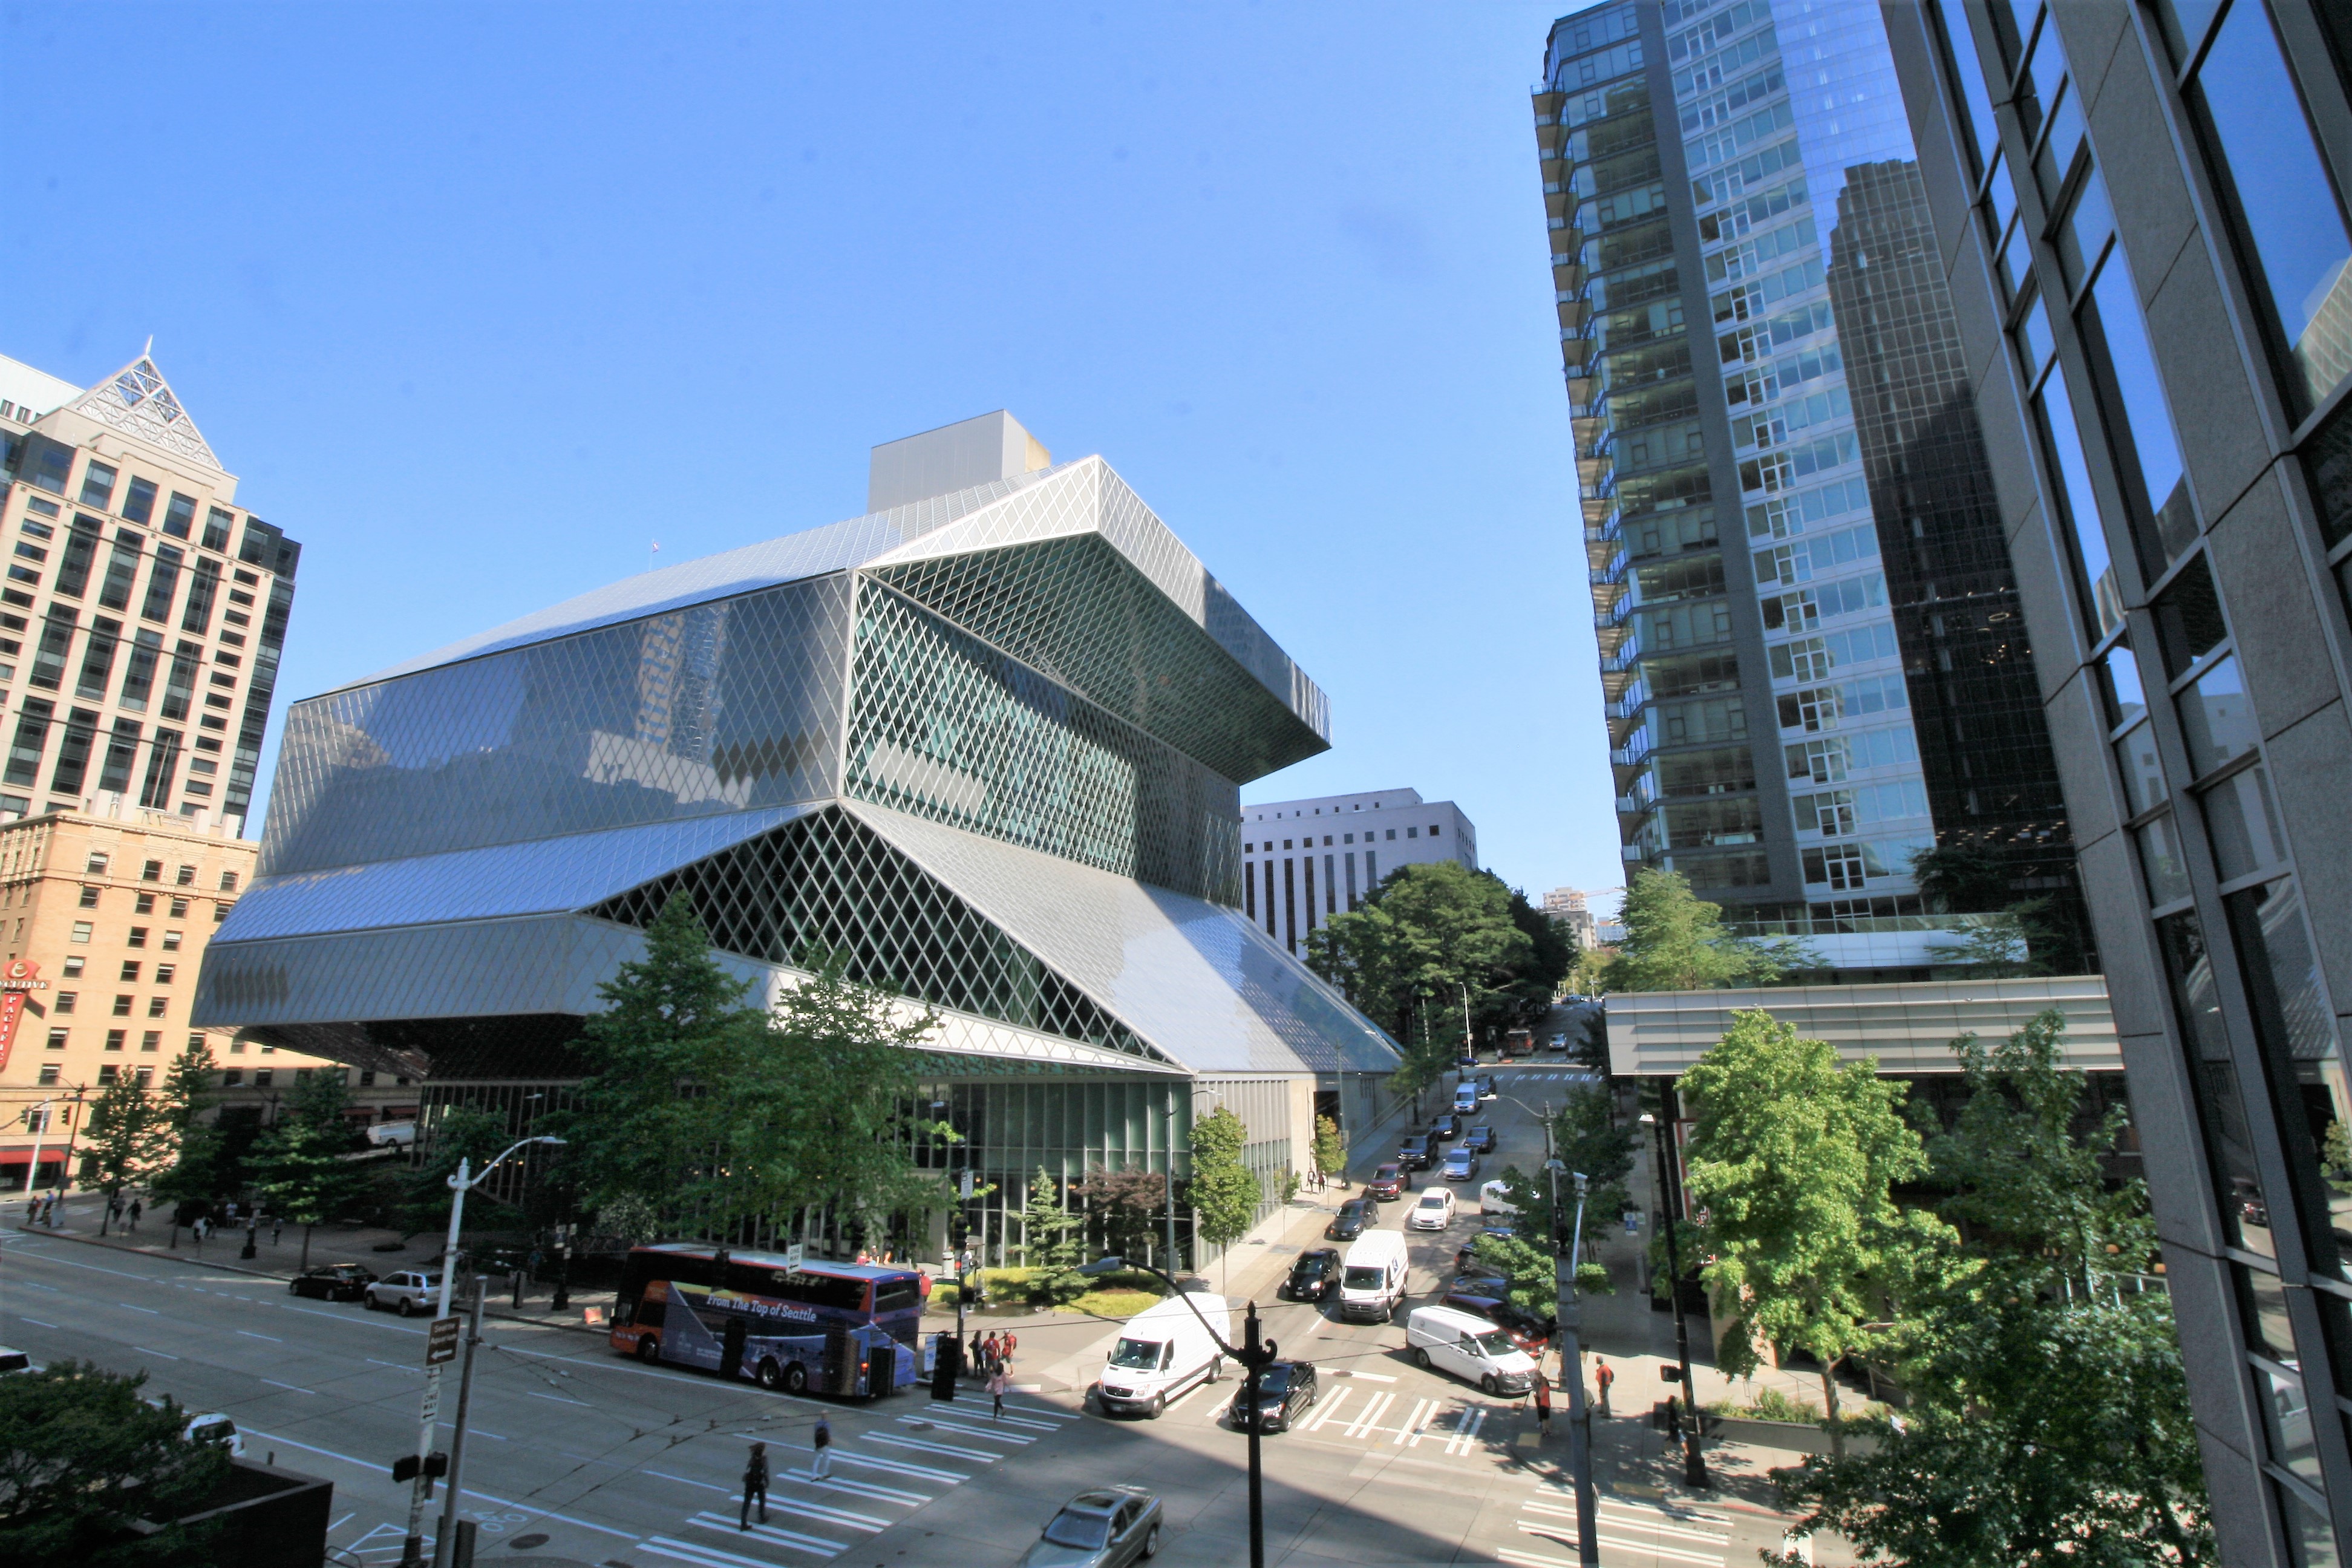 Seattle Public Library After Five